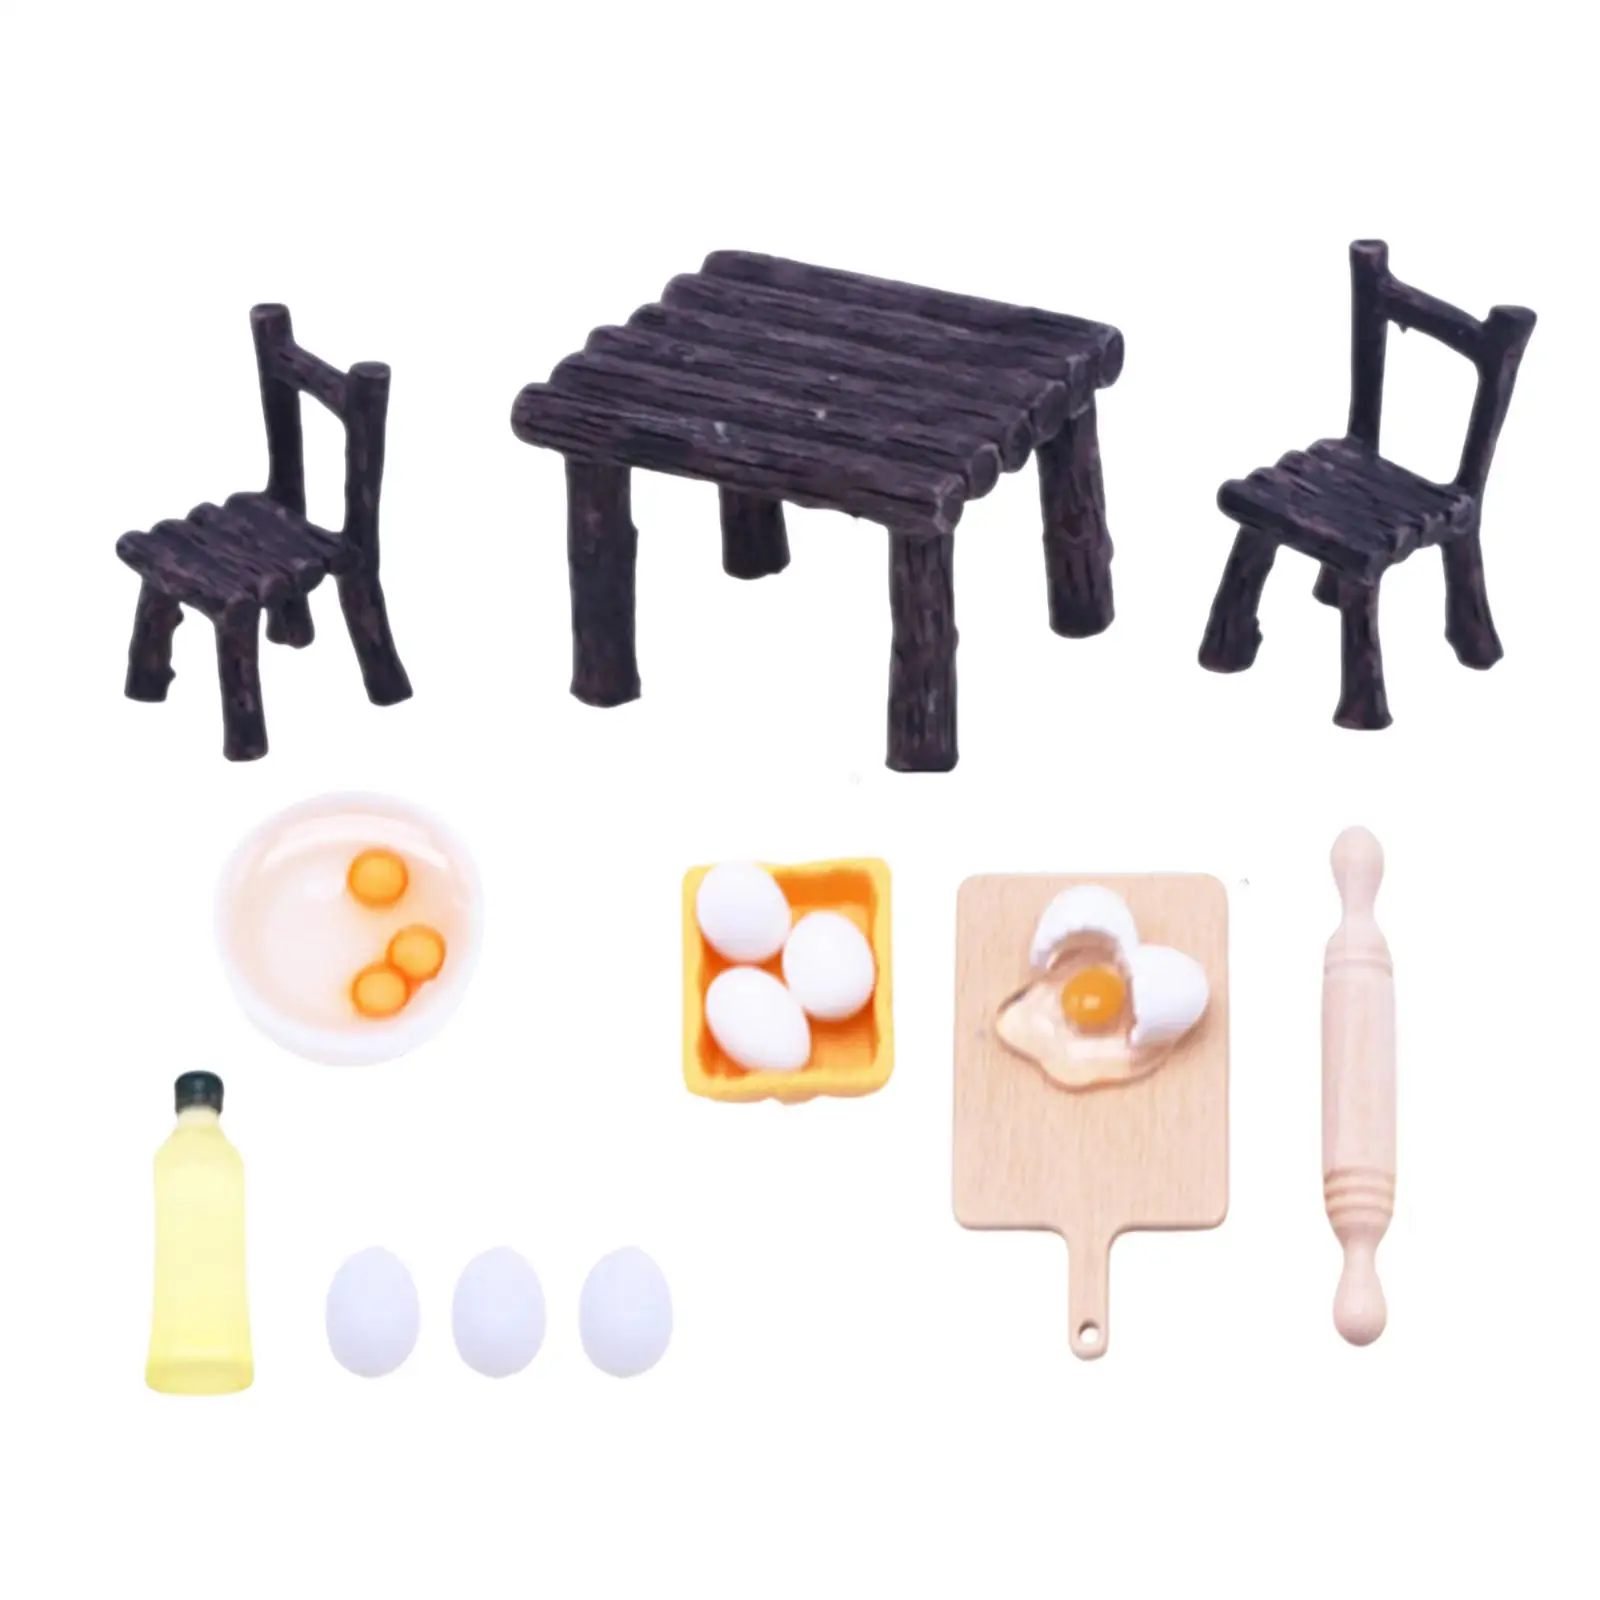 Miniature Play Sets Miniature Rolling Pin Pretend Play Toy Set Simulation Baking Scene Mini Table Chair Food Set Life Scene Gift